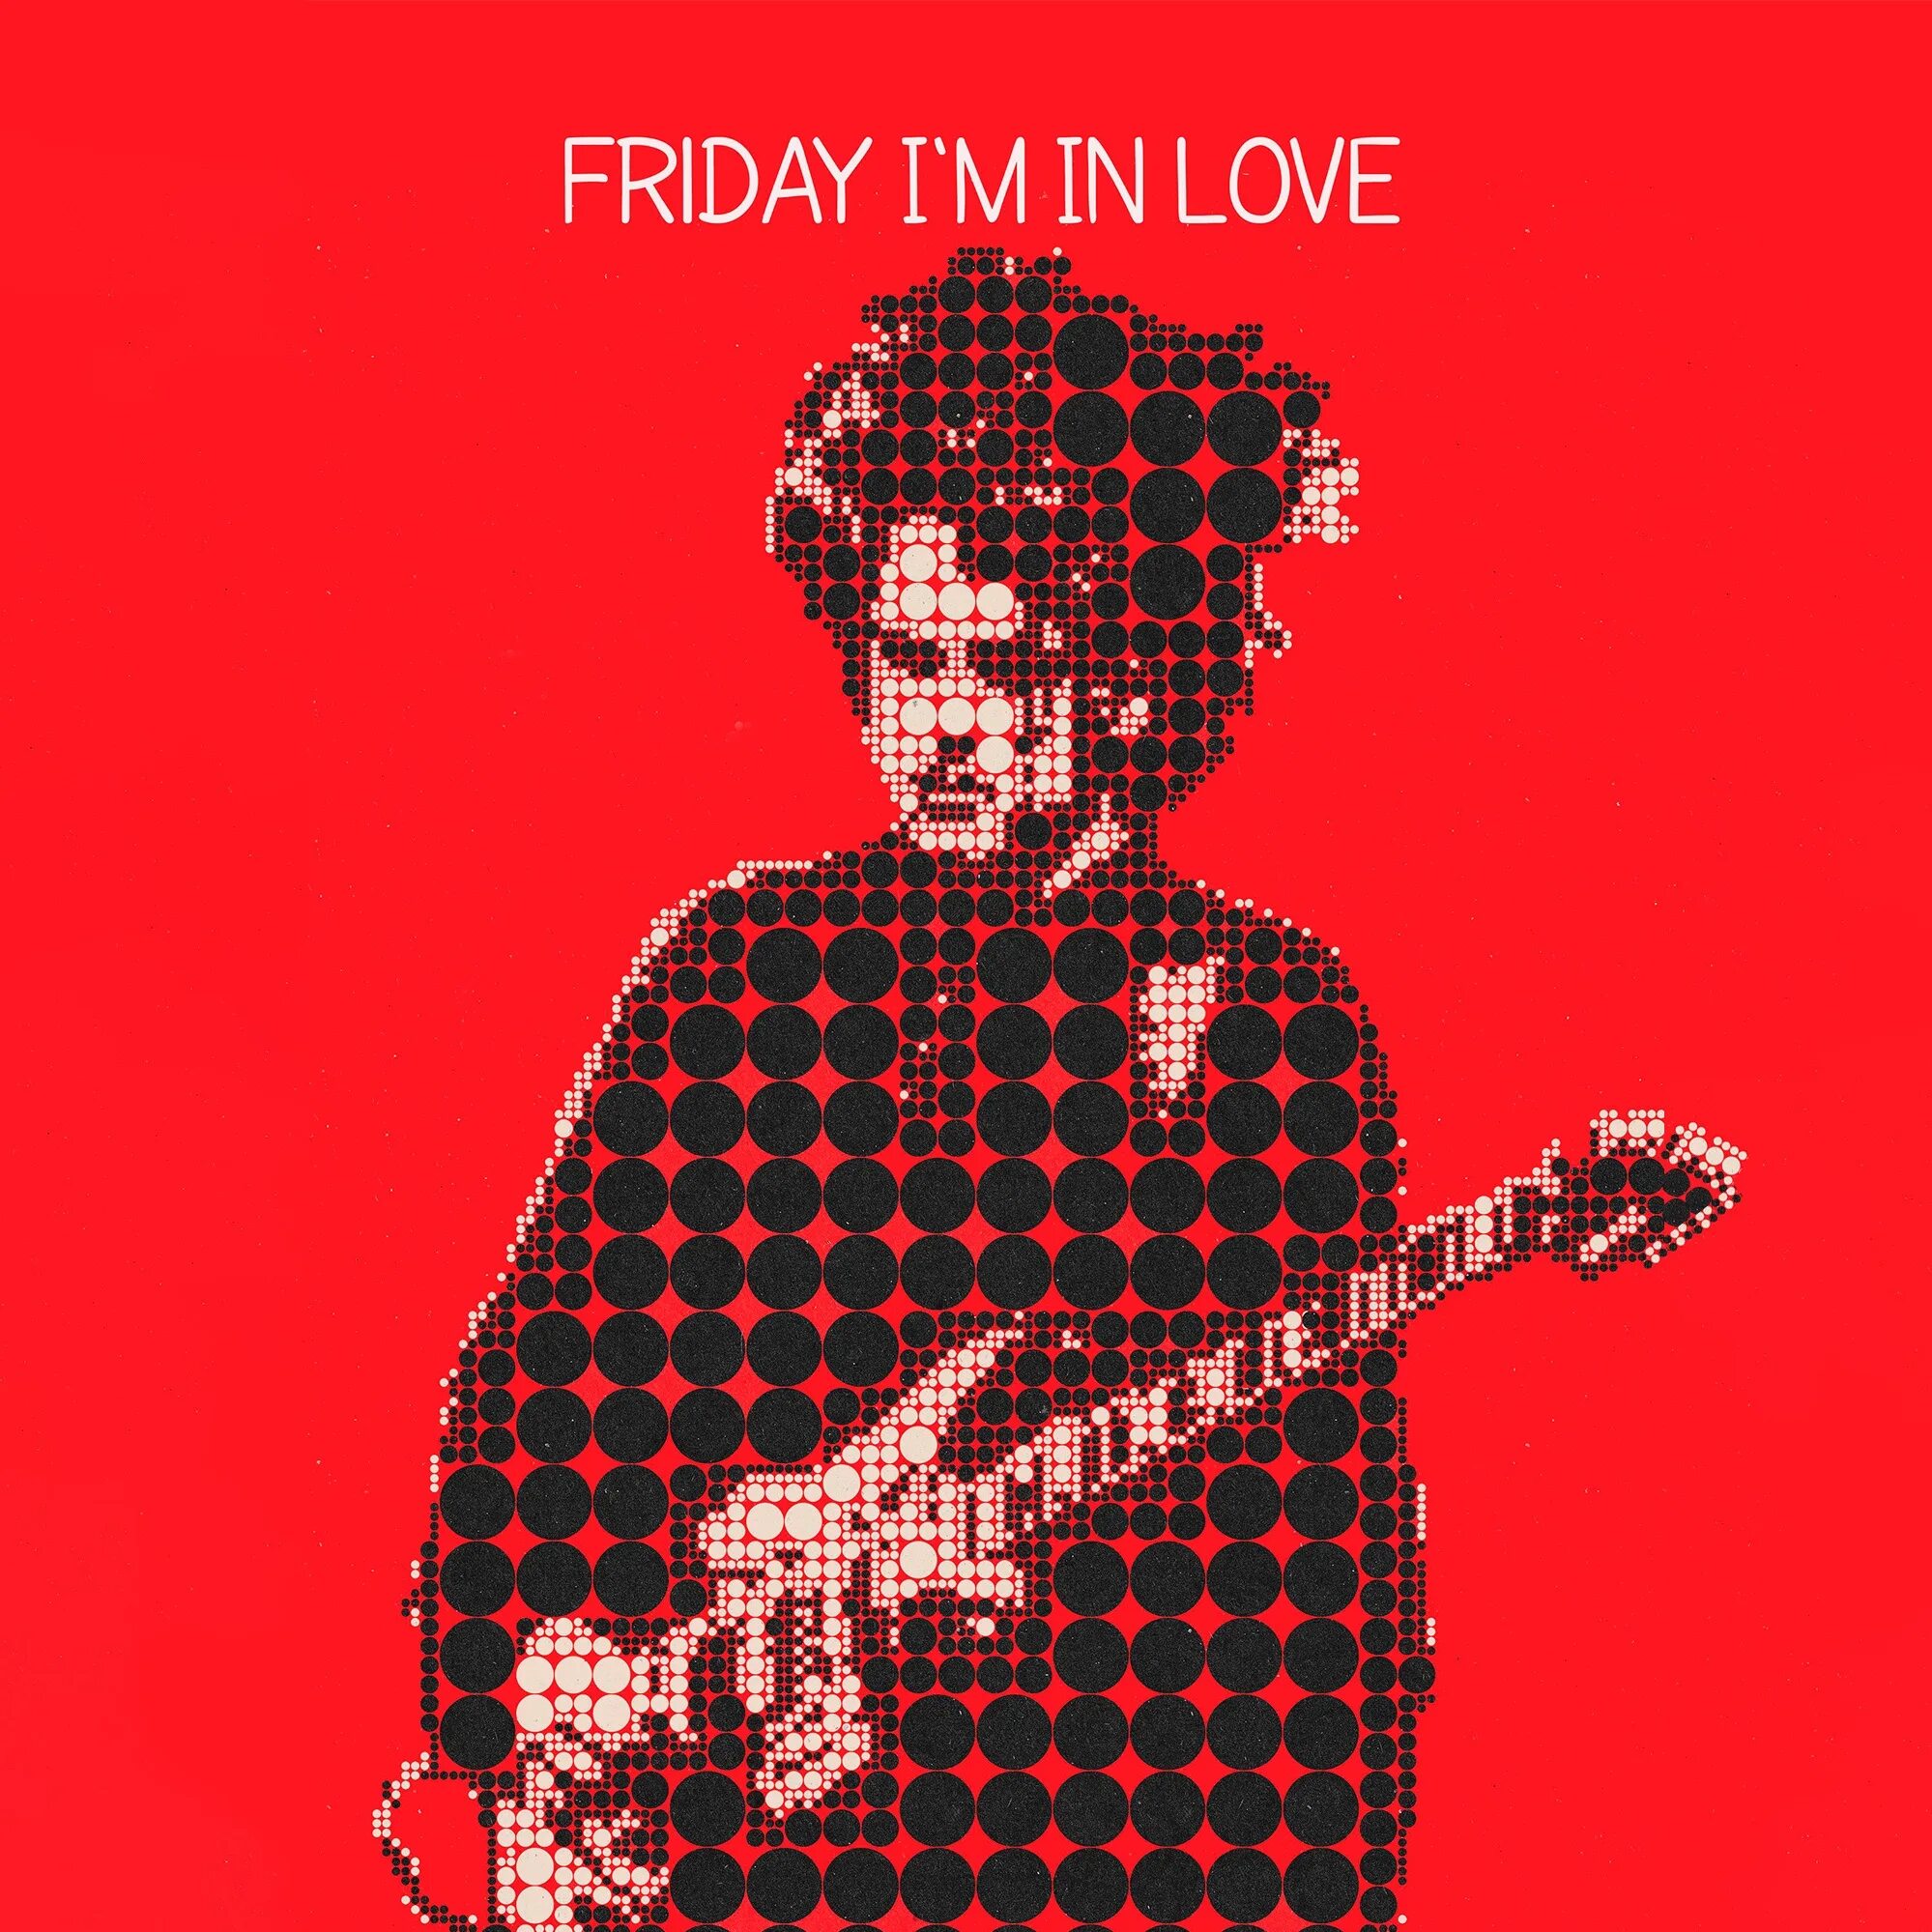 Friday i m in love the cure. Friday im in Love the Cure. The Cure Friday i'm in Love бой. The Cure Friday i'm in Love логотип.